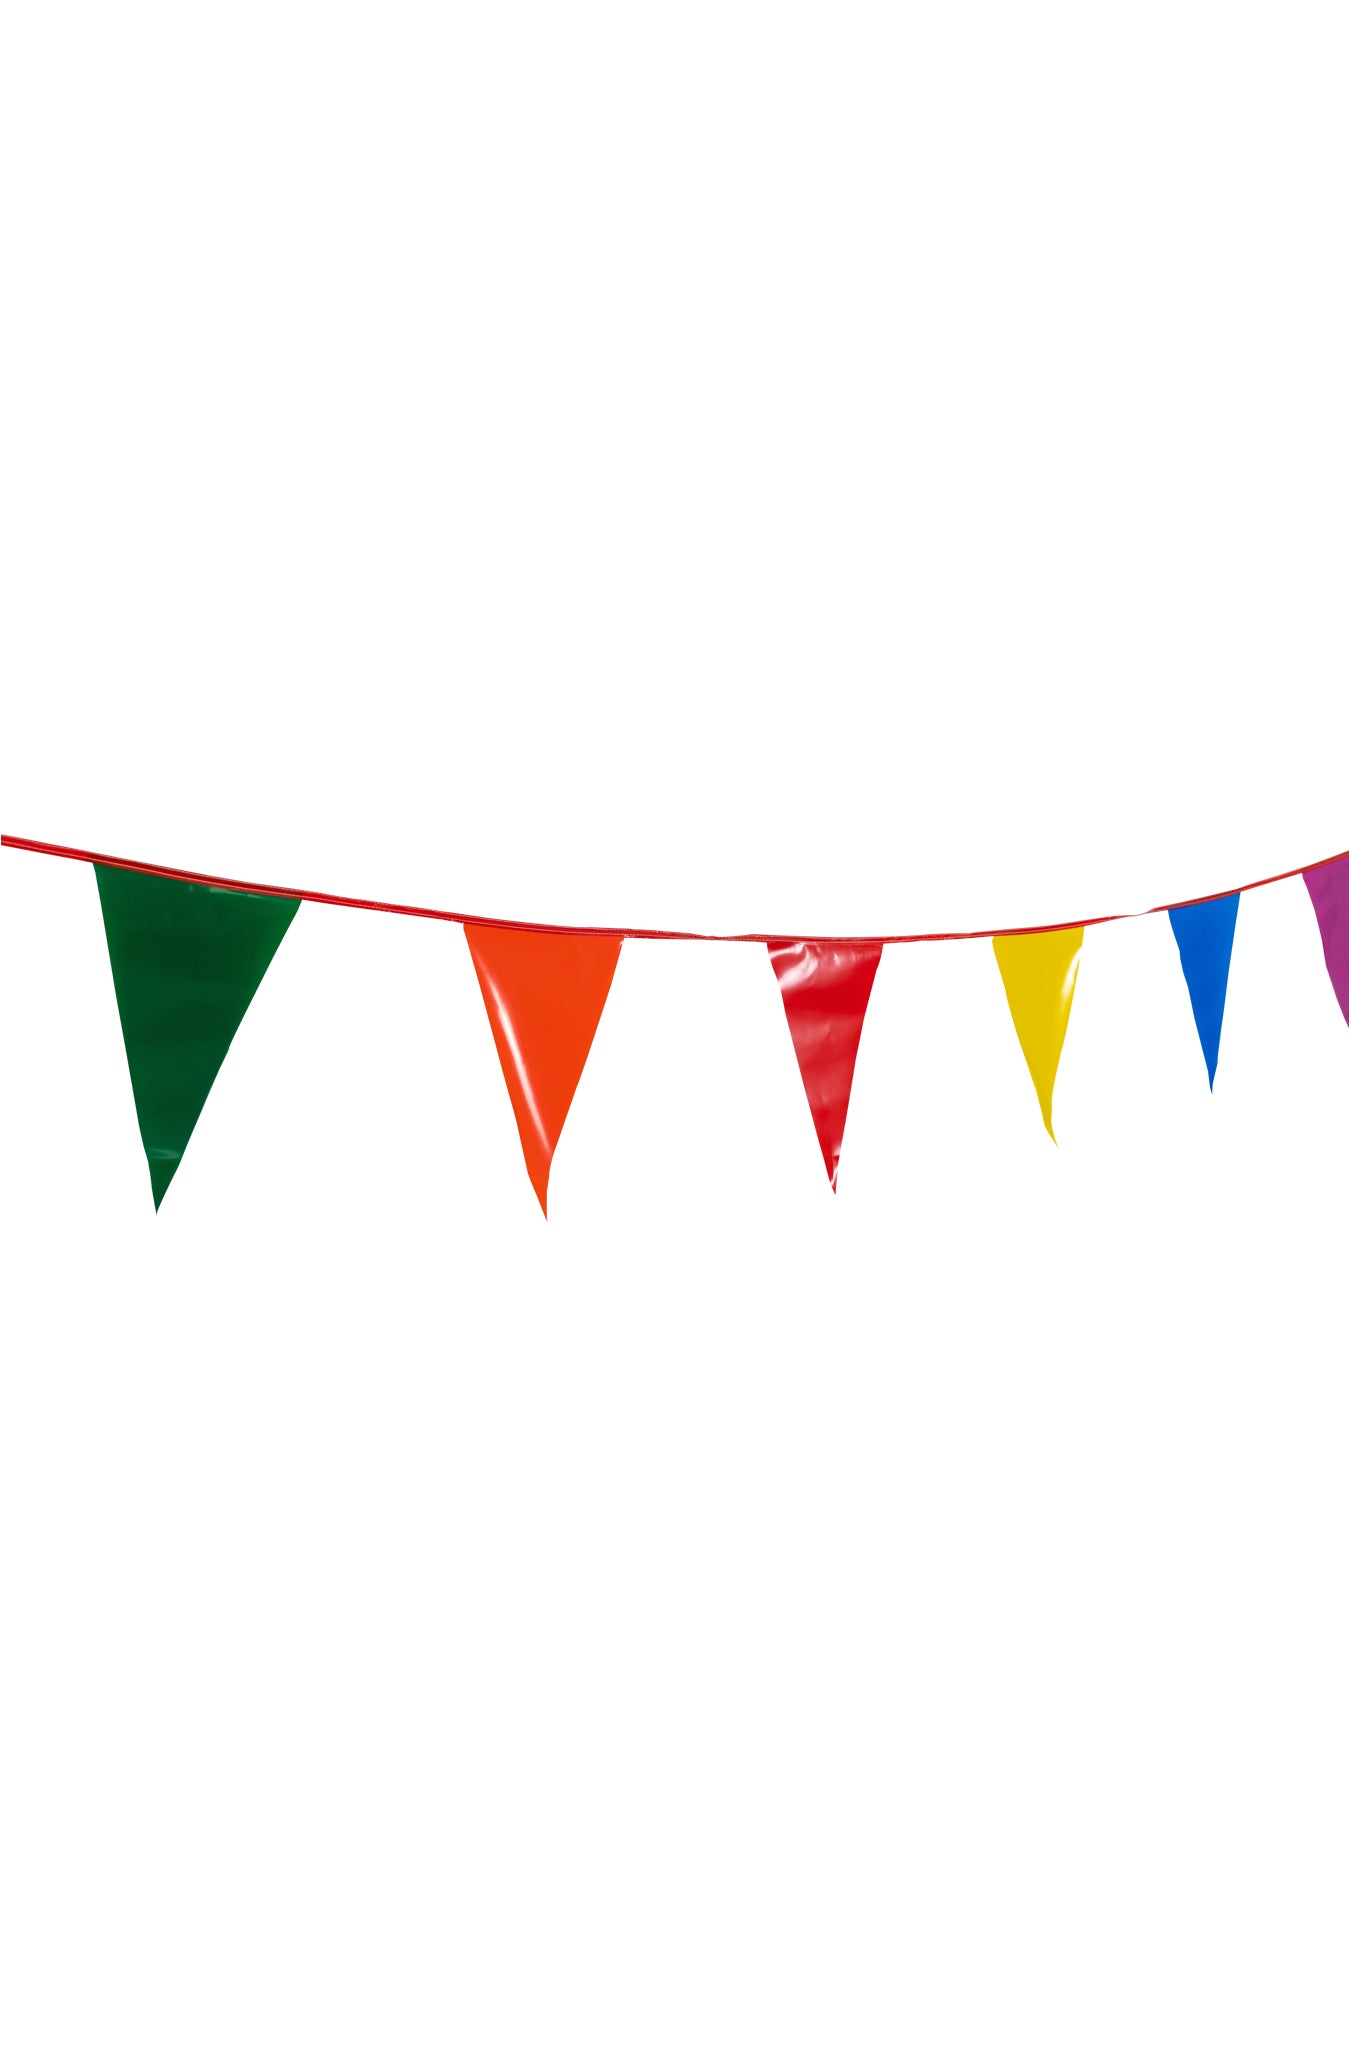 Buy CherishX Happy Birthday Banner/Bunting Flag - For Party Decorations,  Multicolour Online at Best Price of Rs 89 - bigbasket